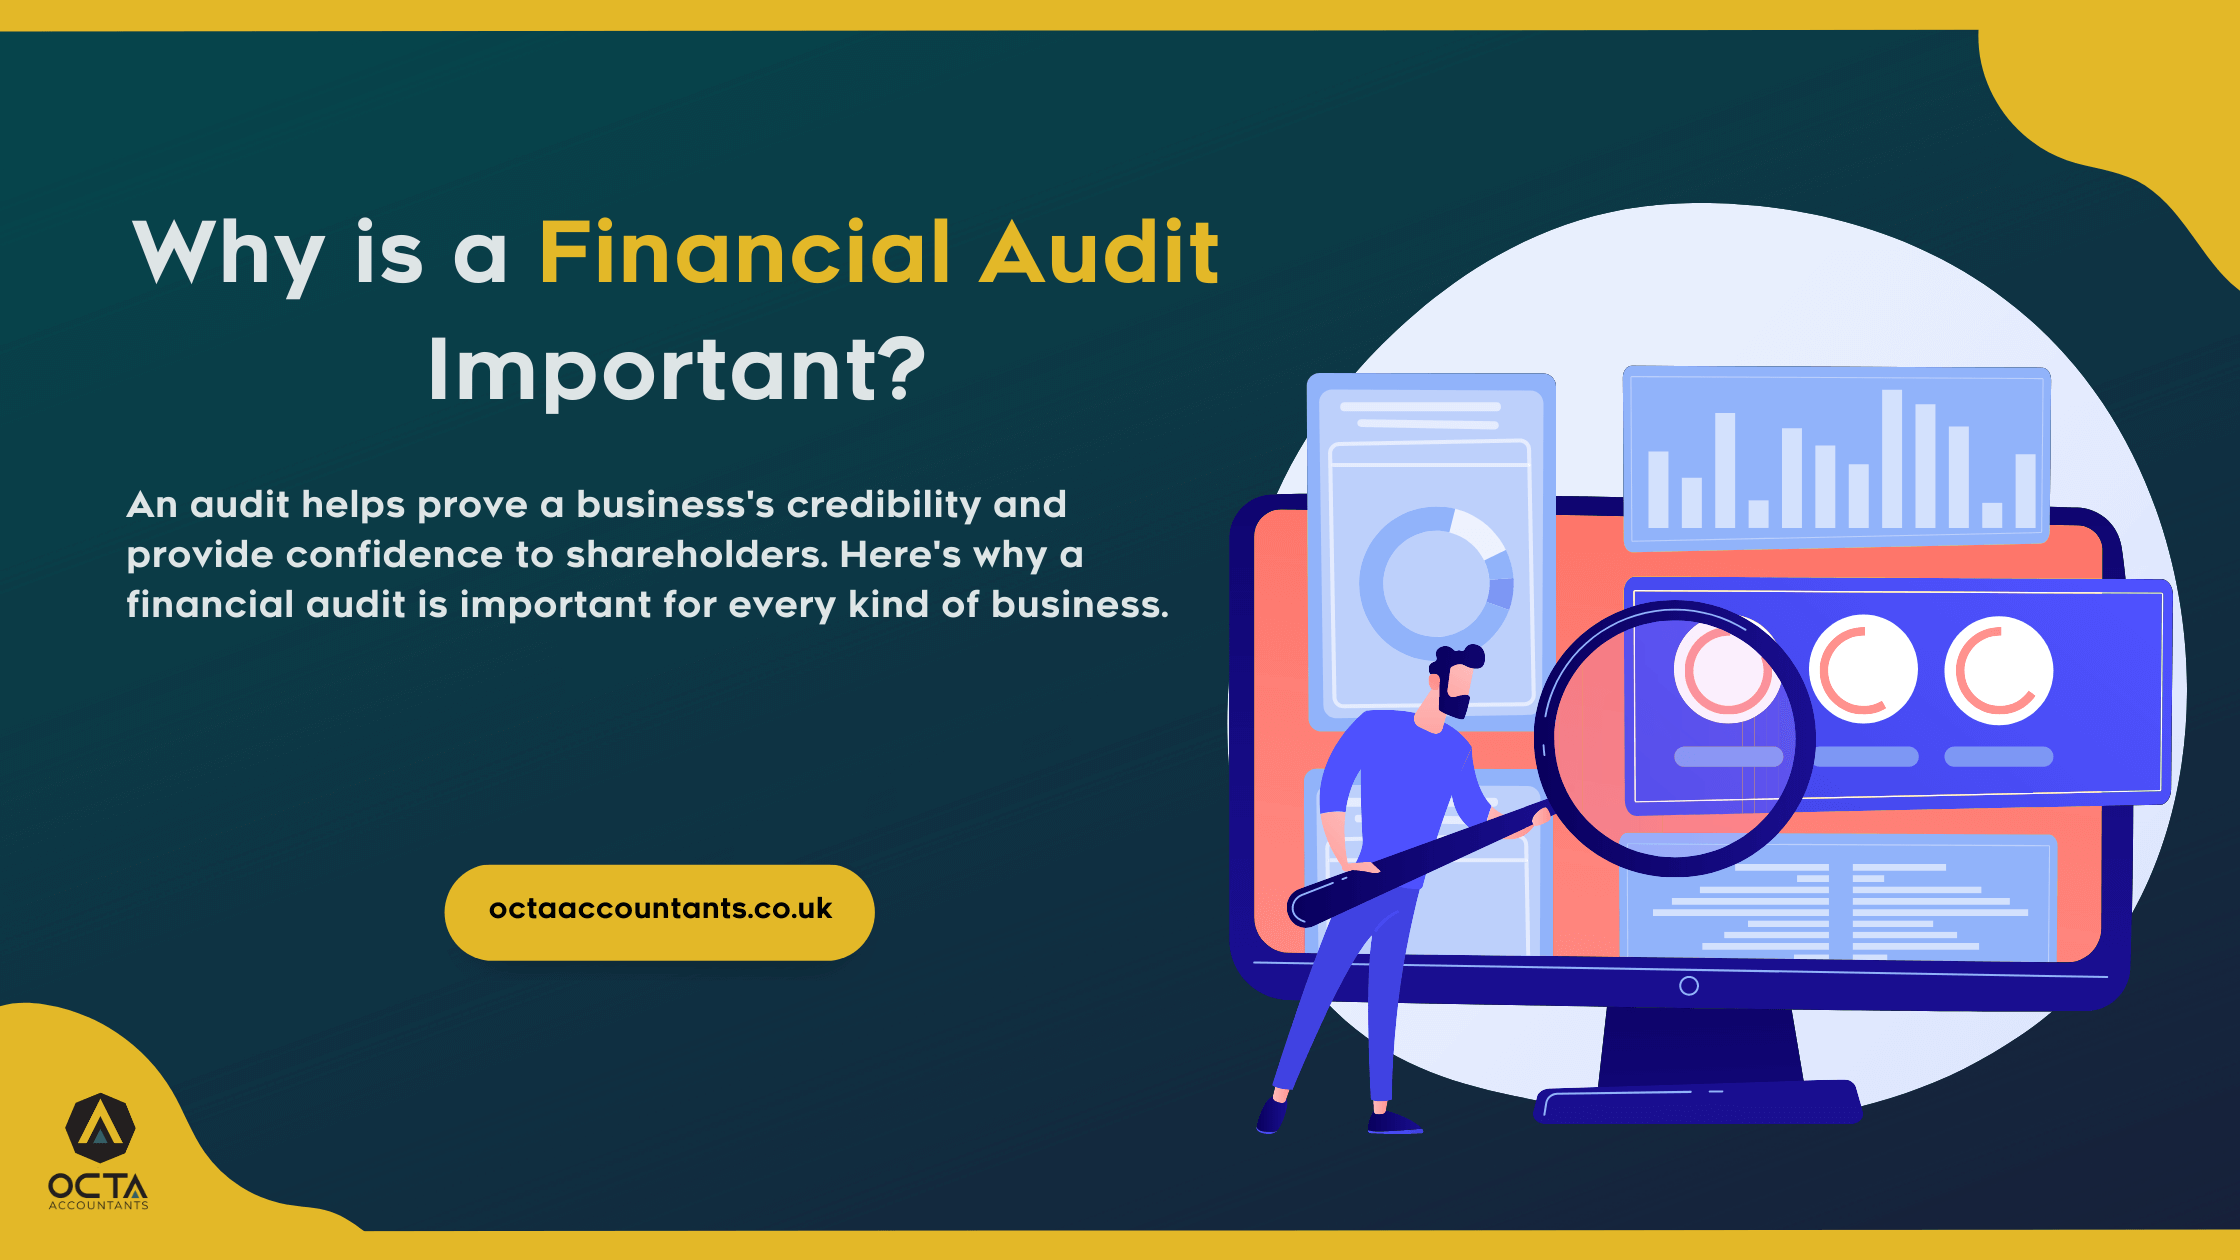 Why is a financial audit important